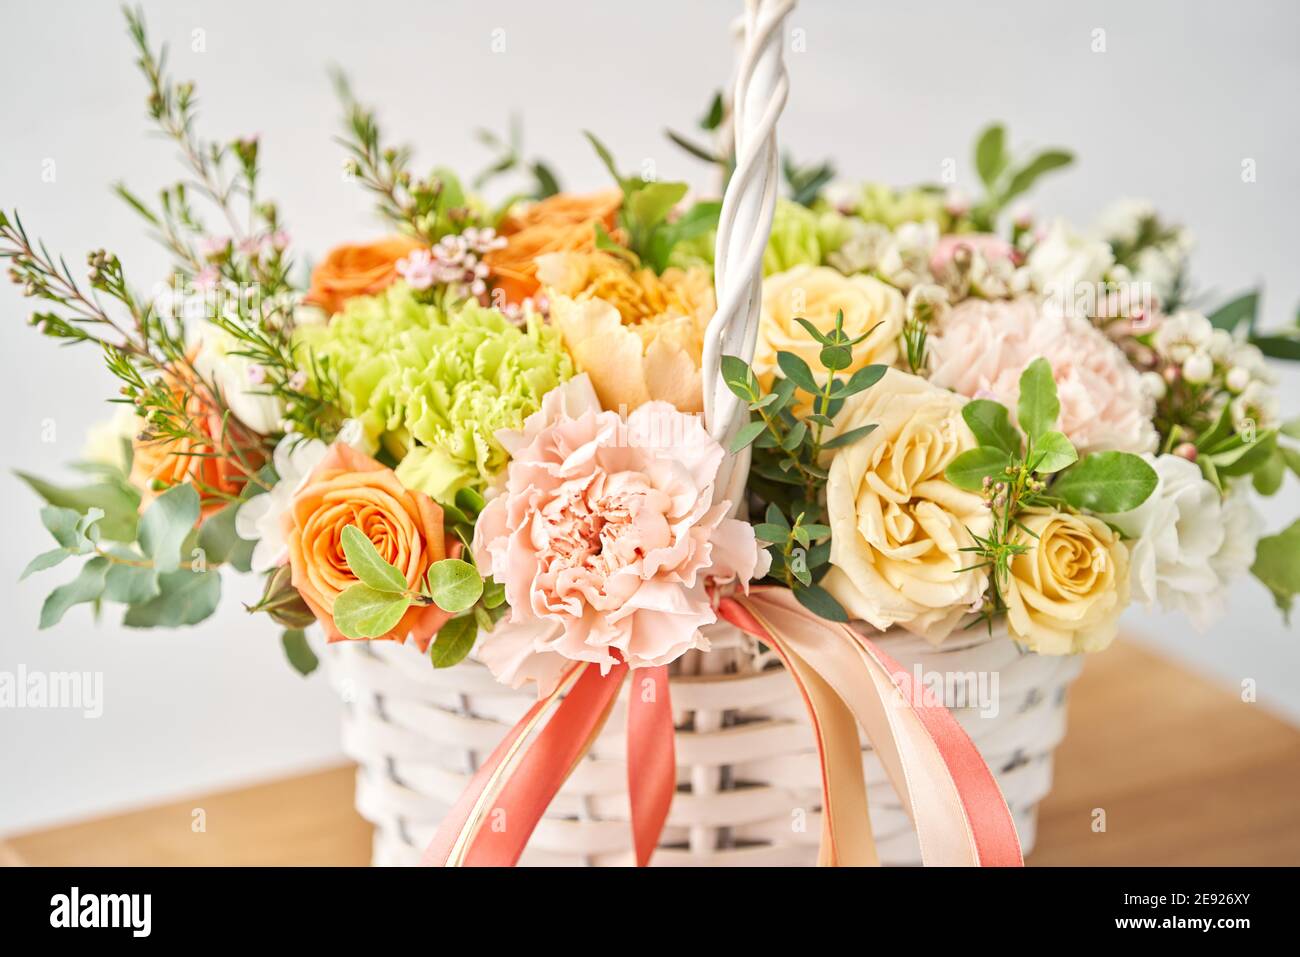 Small flower shop and Flowers delivery. Flower arrangement in Wicker basket. Beautiful bouquet of mixed flowers on wooden table. Handsome fresh Stock Photo